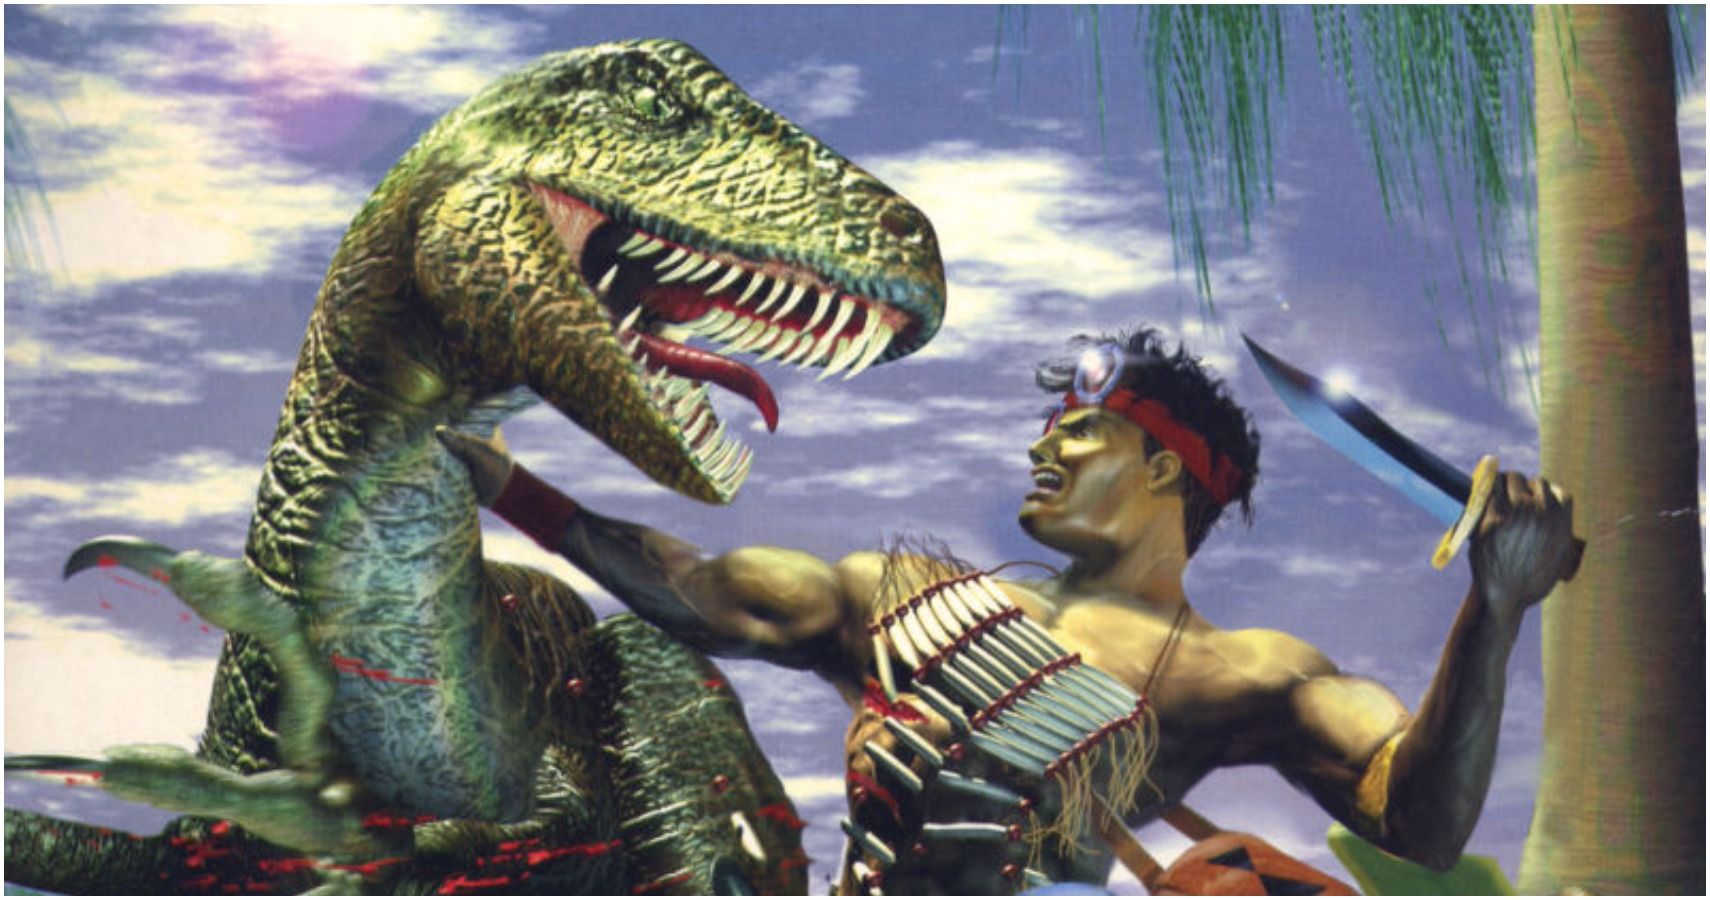 The Remastered Turok Games Are Coming To Nintendo Switch